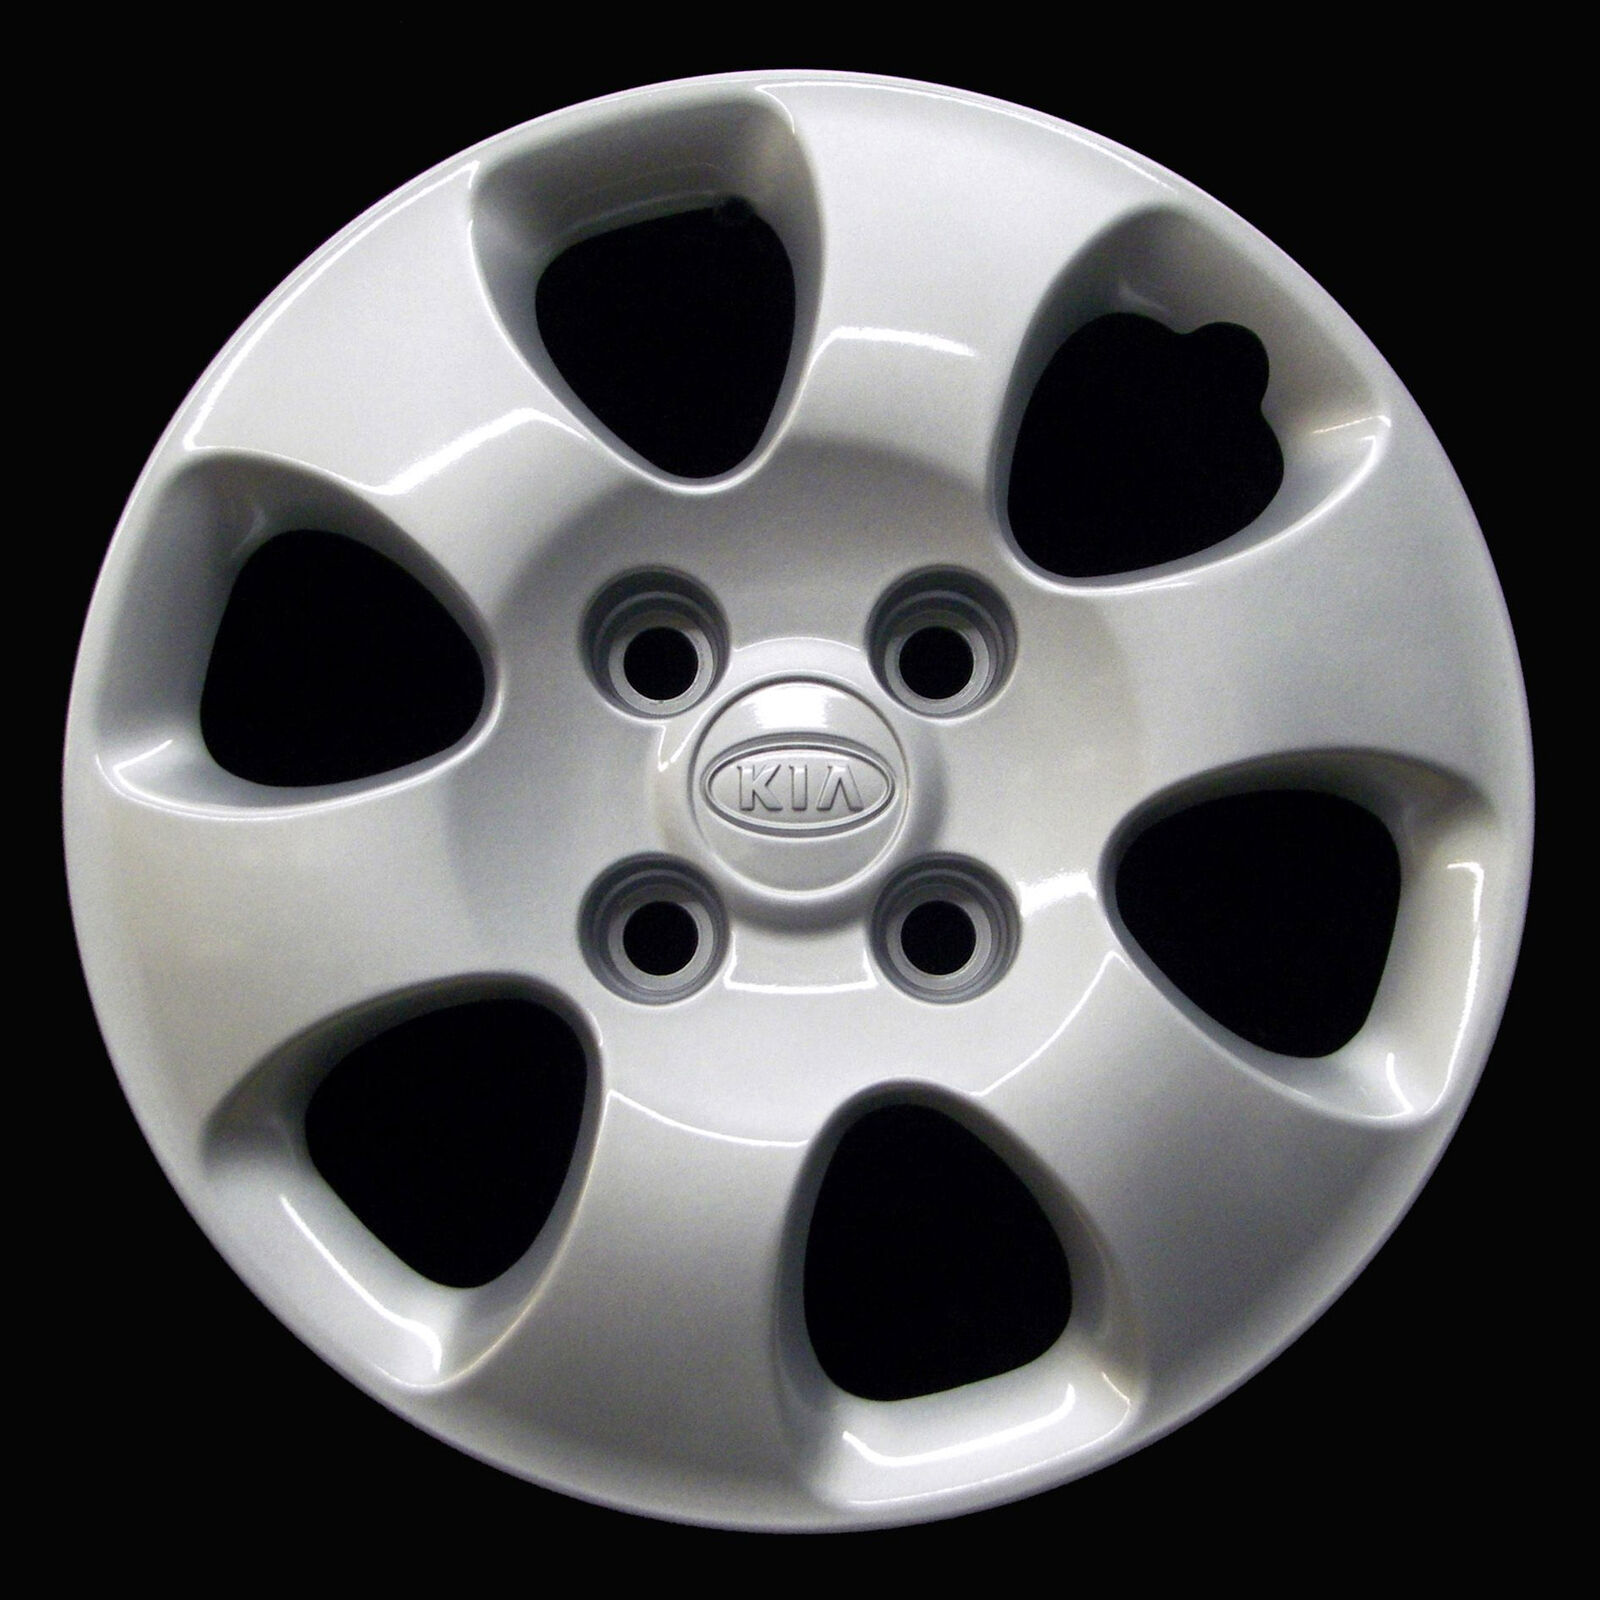 Hubcap for Kia Spectra 2004-2009 Genuine Factory OEM 15-inch Wheel Cover 66014